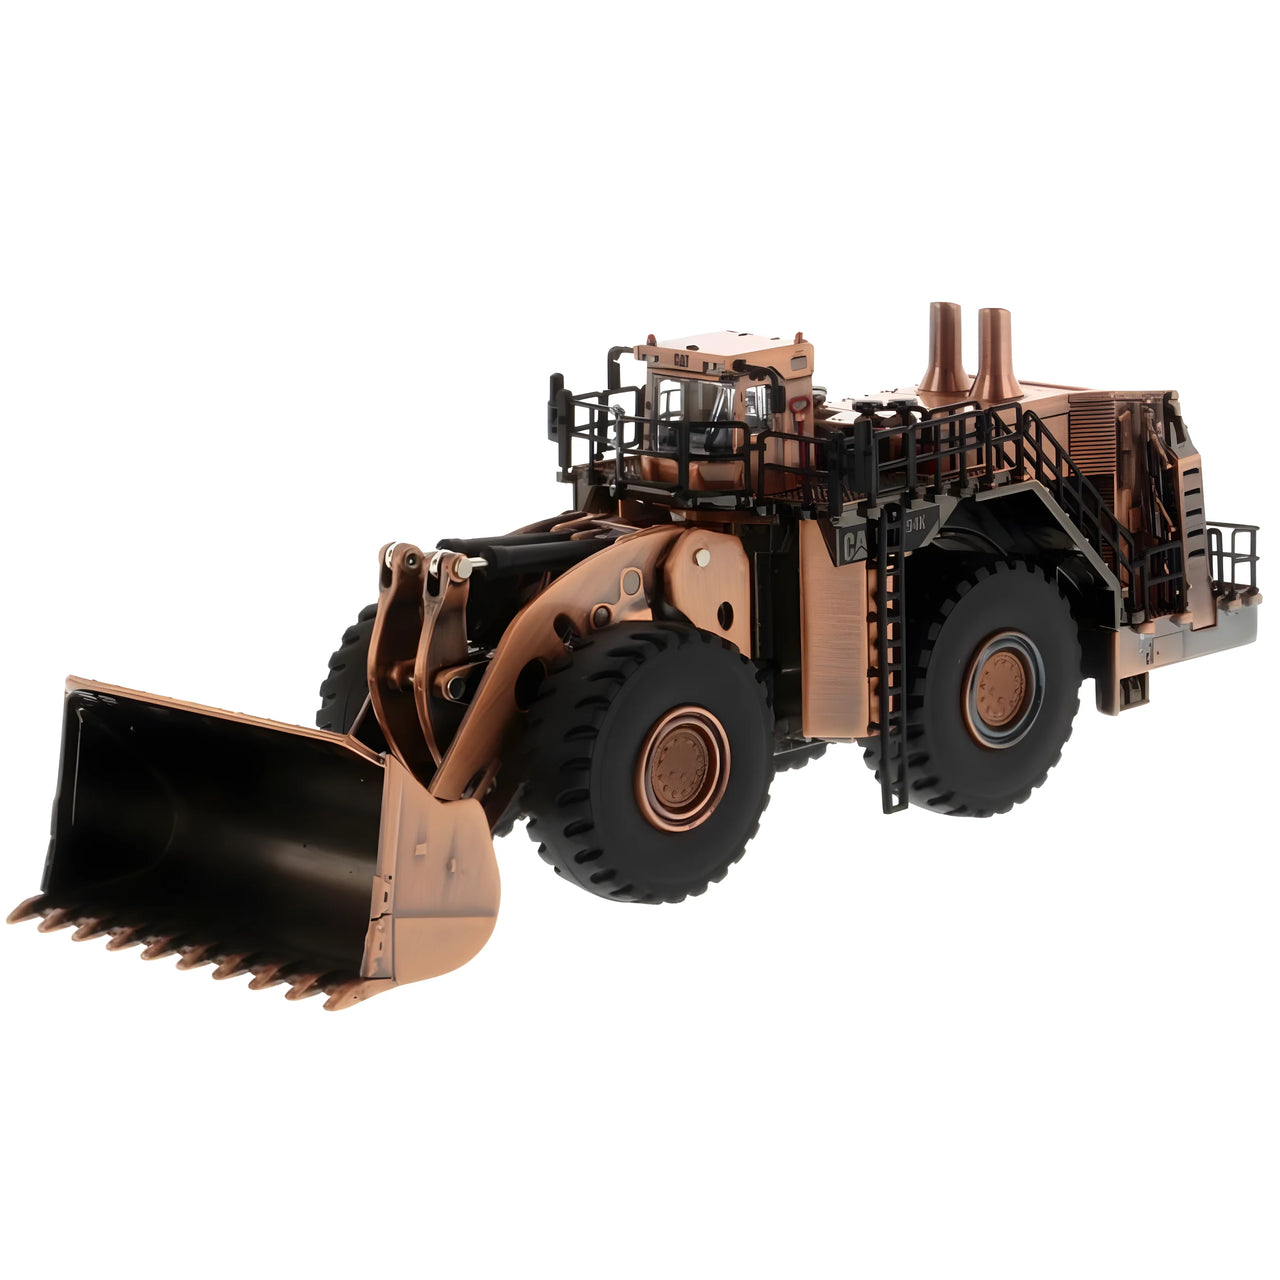 85672 Caterpillar 994K Wheel Loader Copper Plated Scale 1:125 (Discontinued Model)